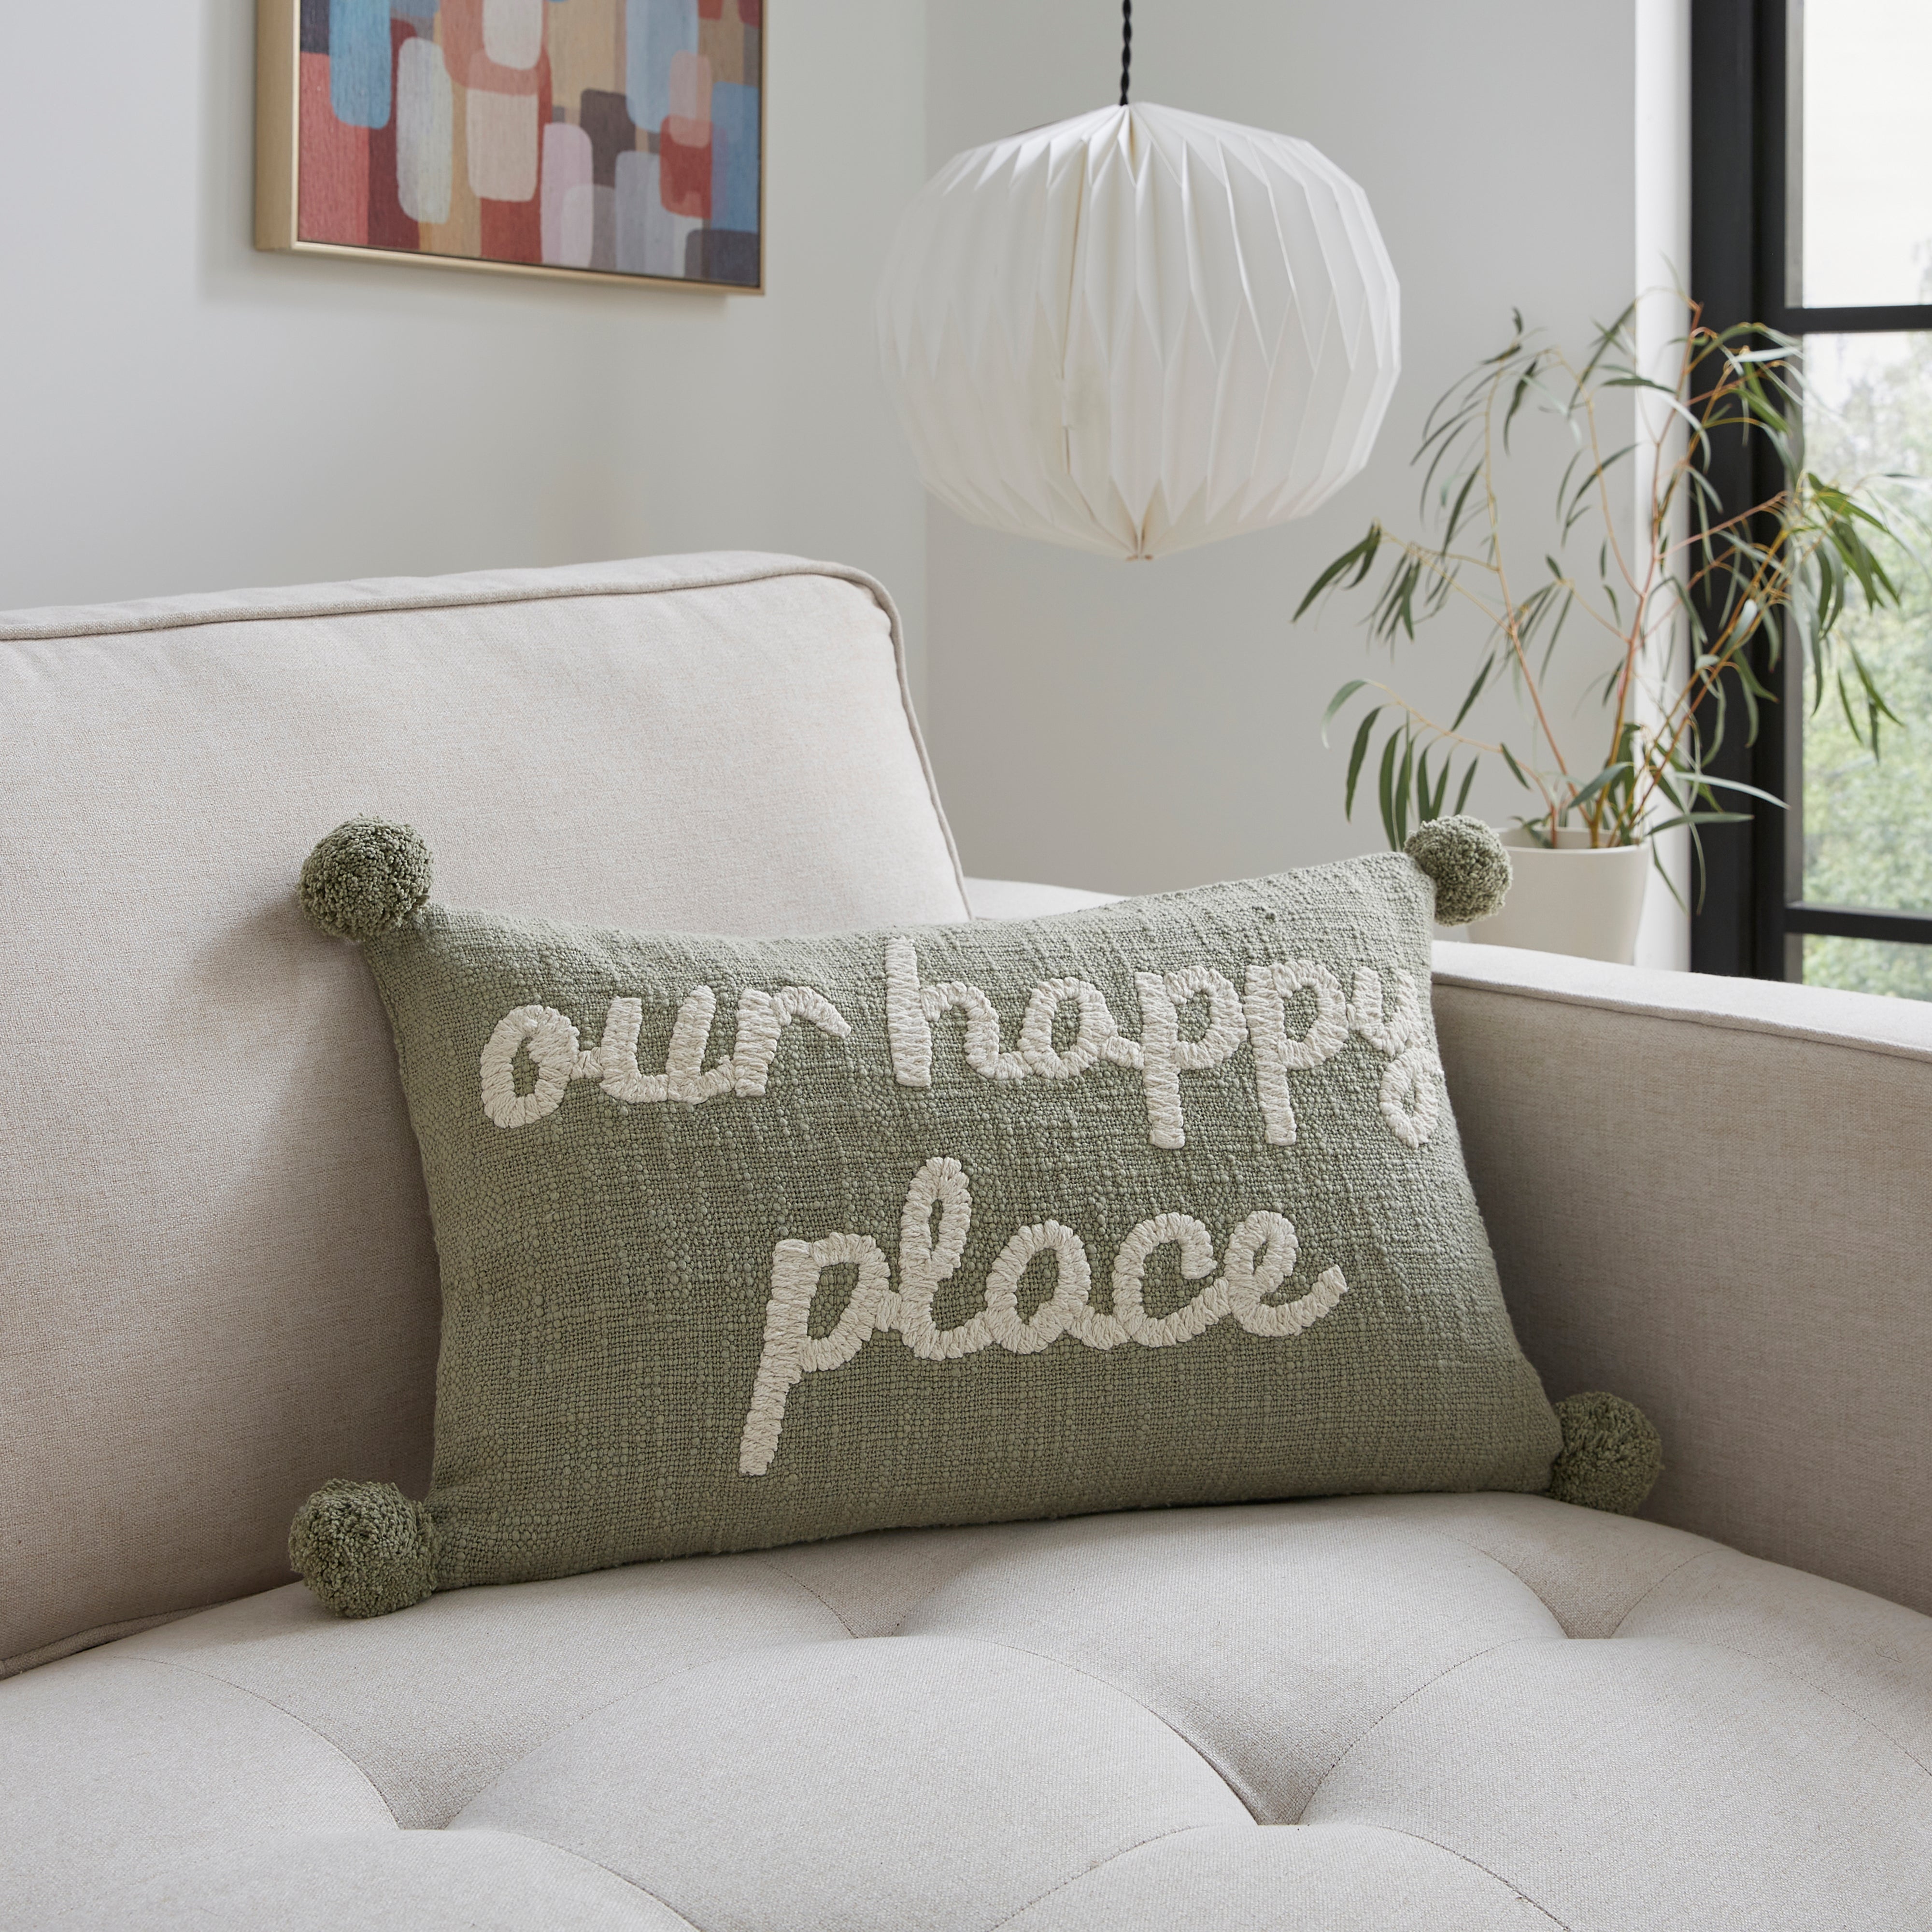 Our Happy Place Embroidered Rectangular Cushion Sage Green